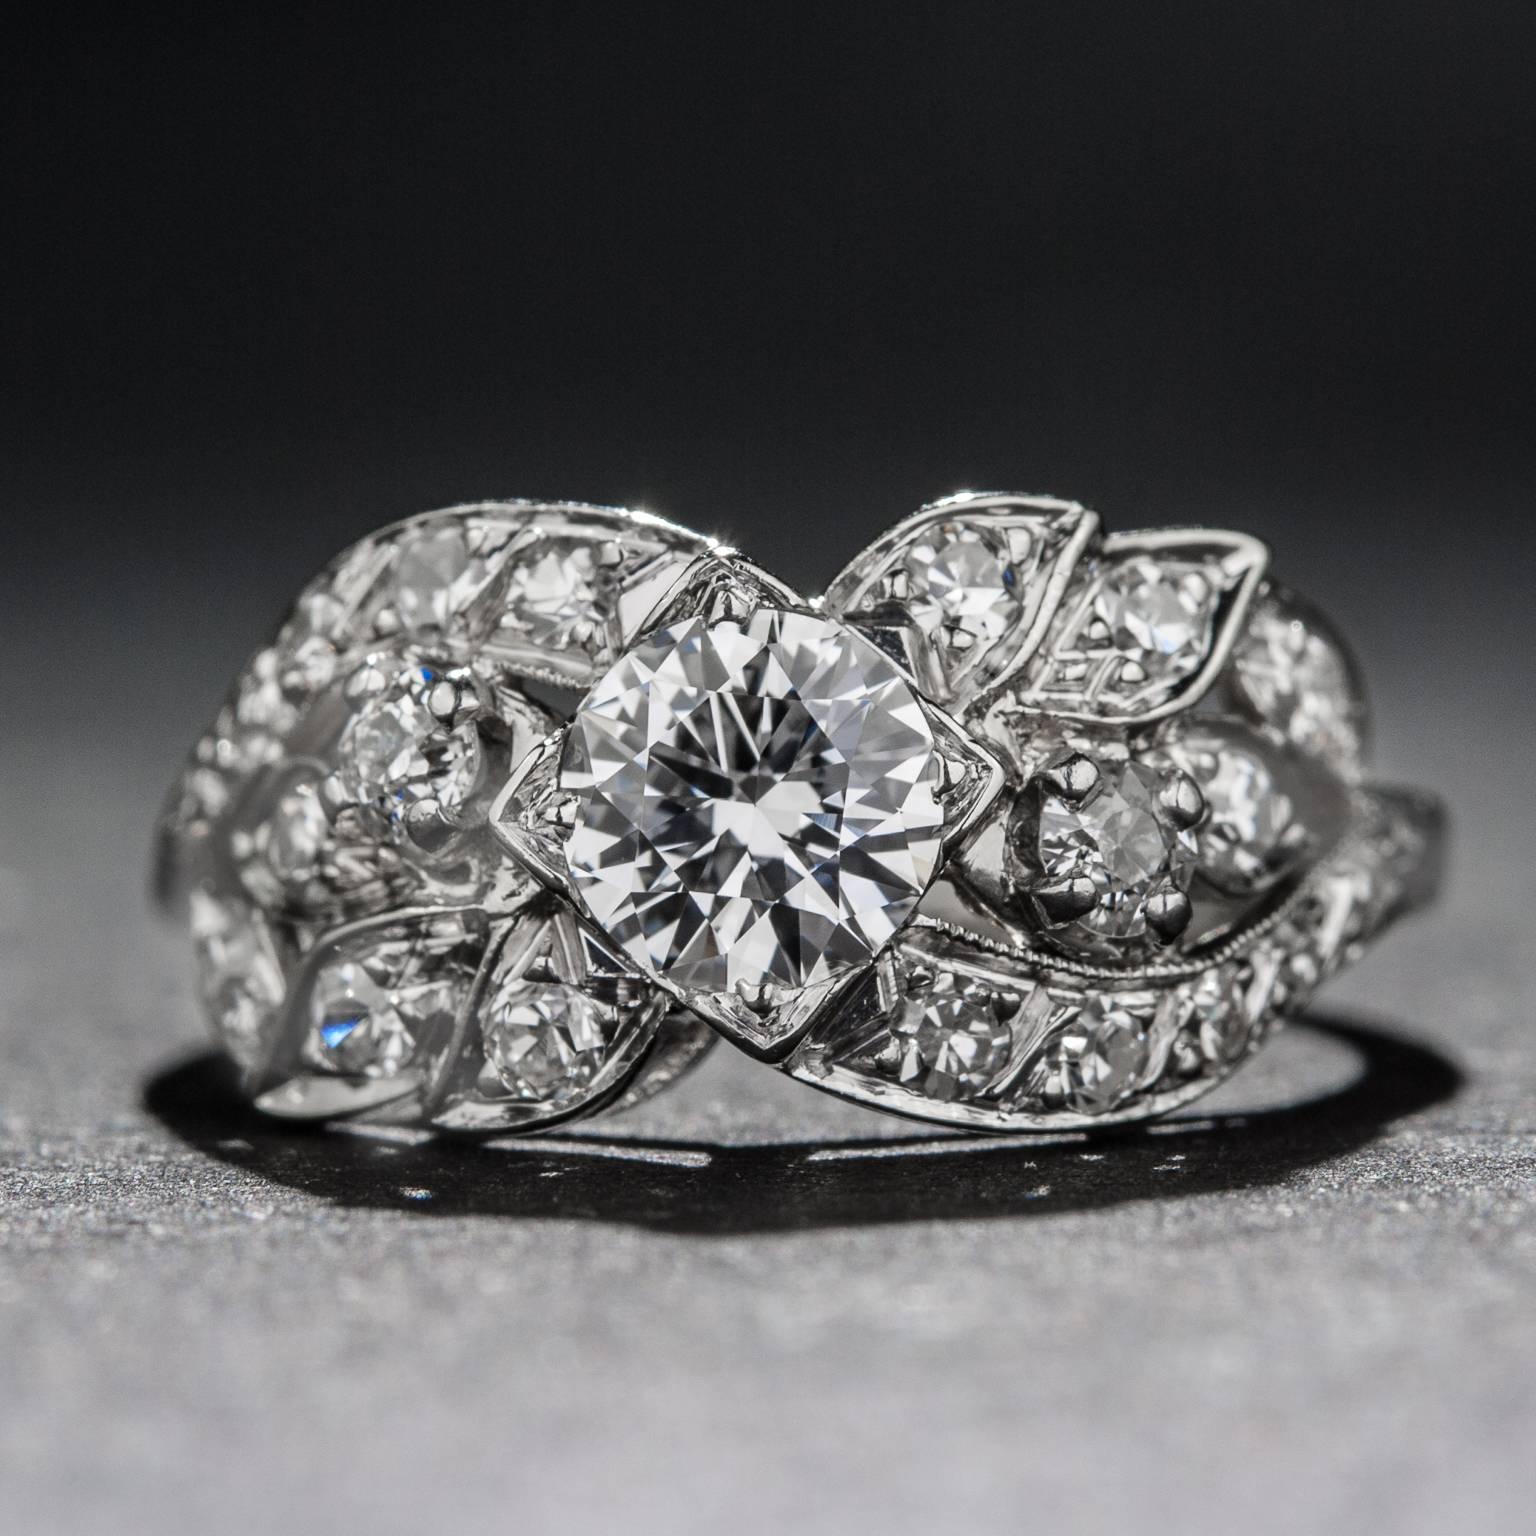 1930s Diamond Gold Ring In Excellent Condition For Sale In Carmel, CA